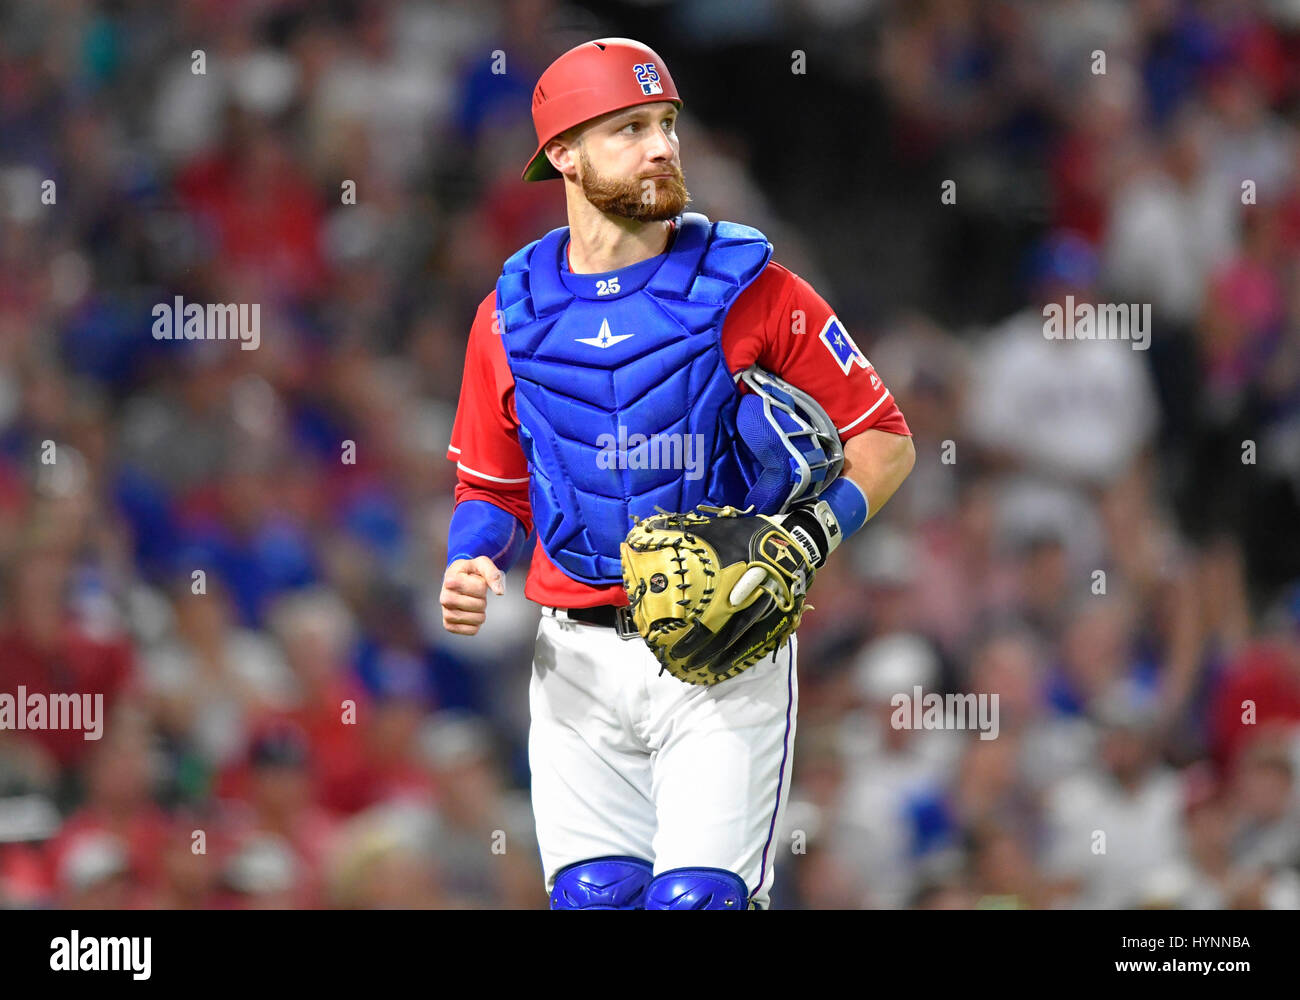 APR 03, 2017: Texas Rangers catcher Jonathan Lucroy #25 during an MLB  Opening Day game between the Cleveland Indians and the Texas Rangers at  Globe Life Park in Arlington, TX Cleveland defeated